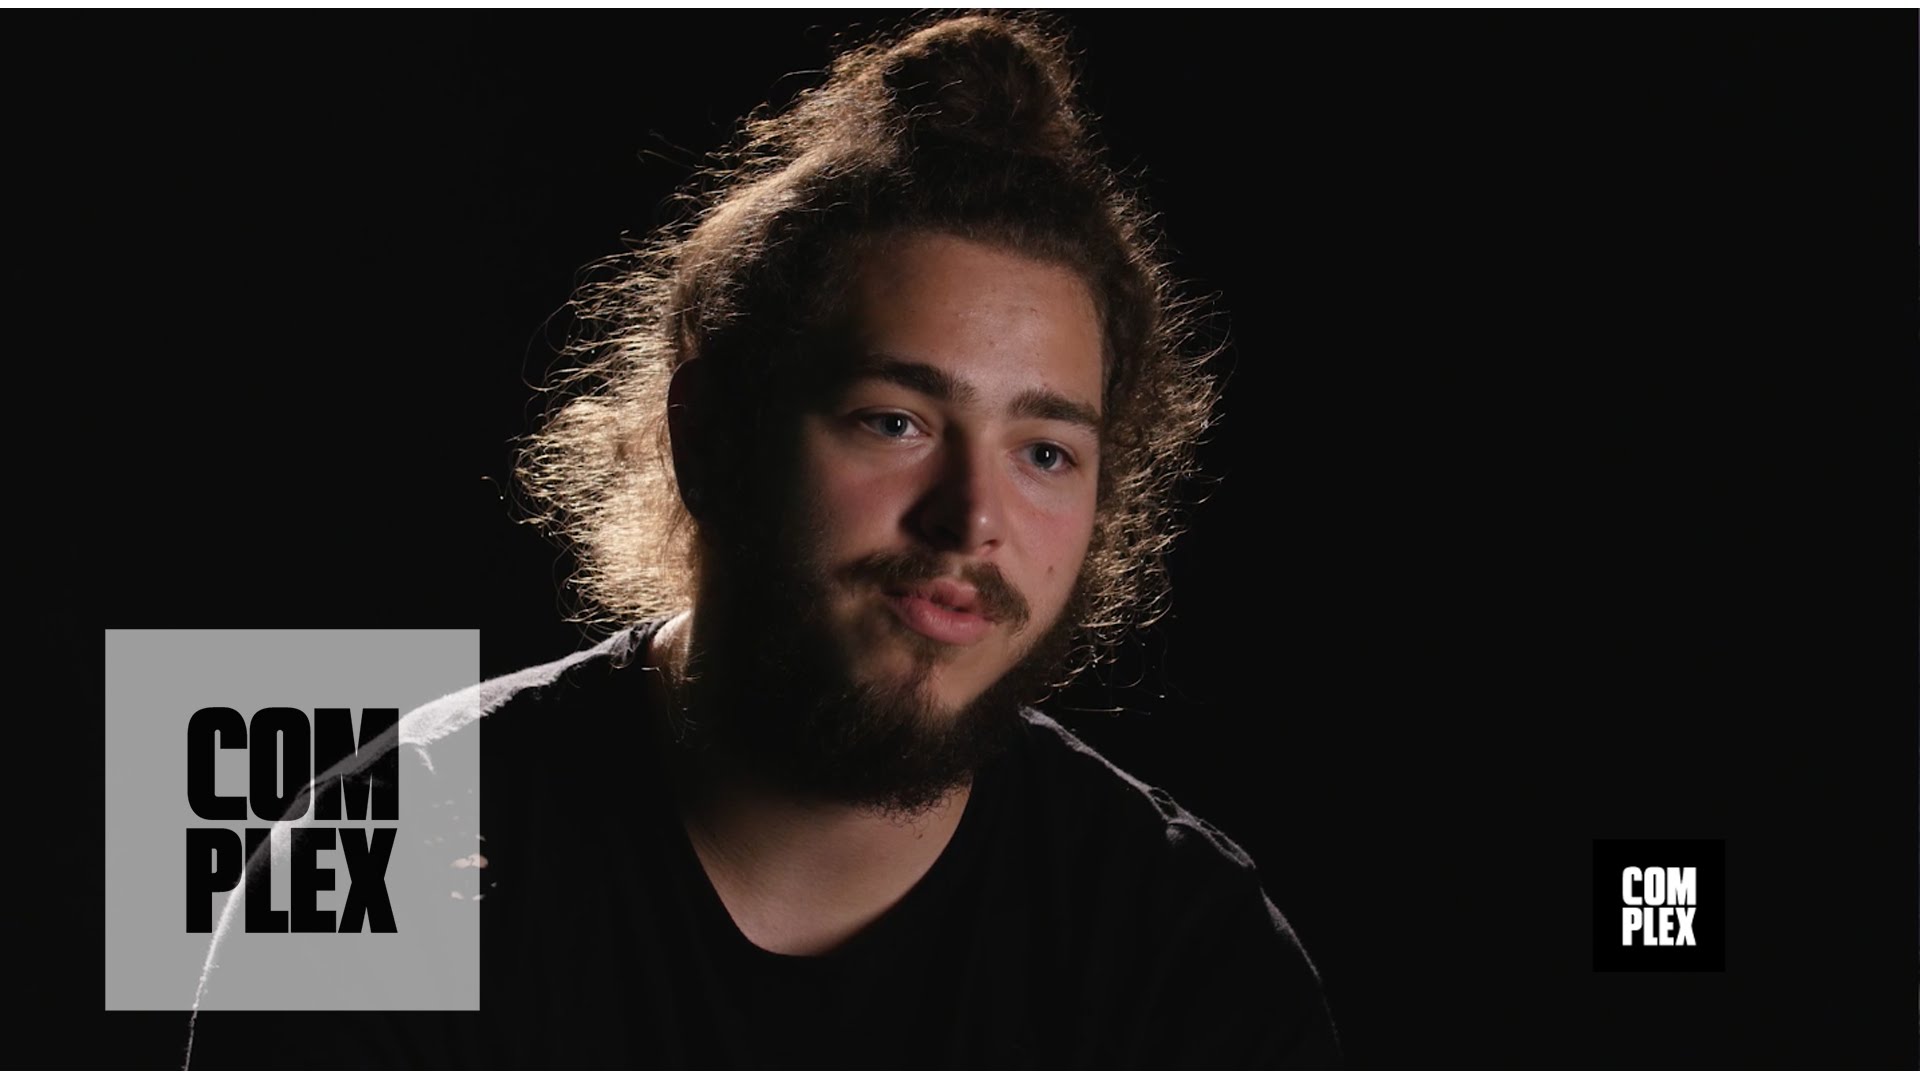 Who Is Post Malone? The “White Iverson” Rapper Talks About His Upcoming Debut Album